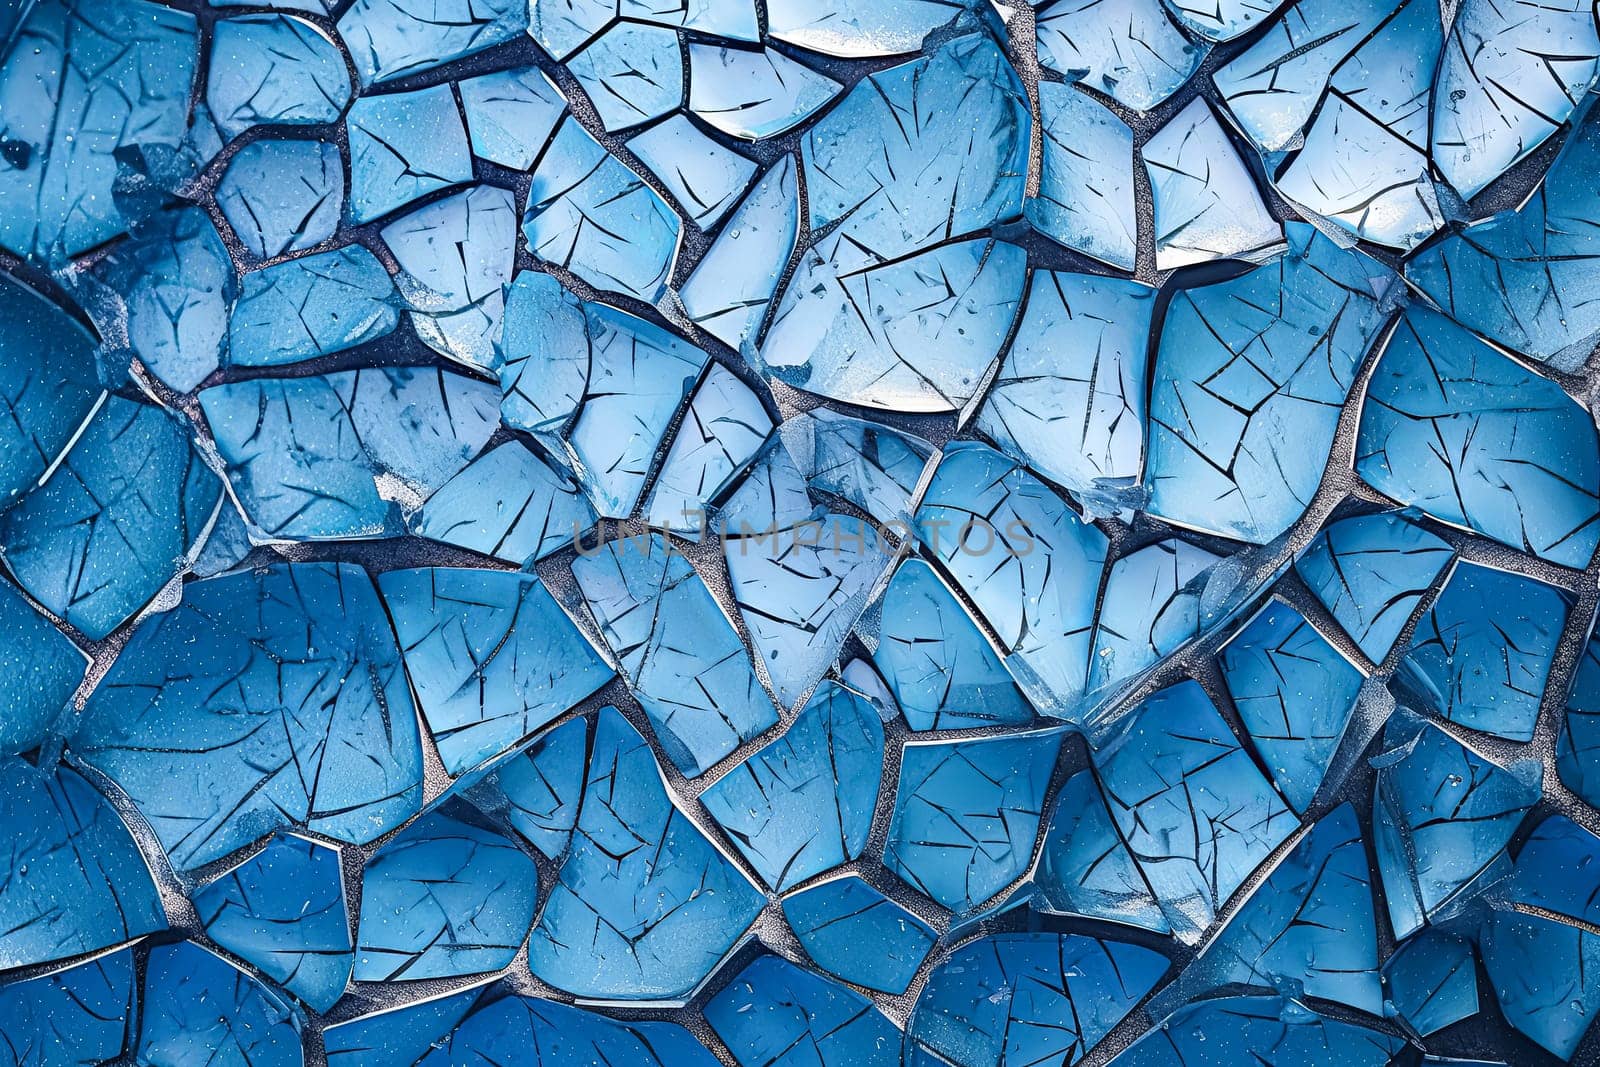 A blue and white image of a cracked surface. The cracks are jagged and the blue is bold and vibrant. The image has a sense of brokenness and fragility